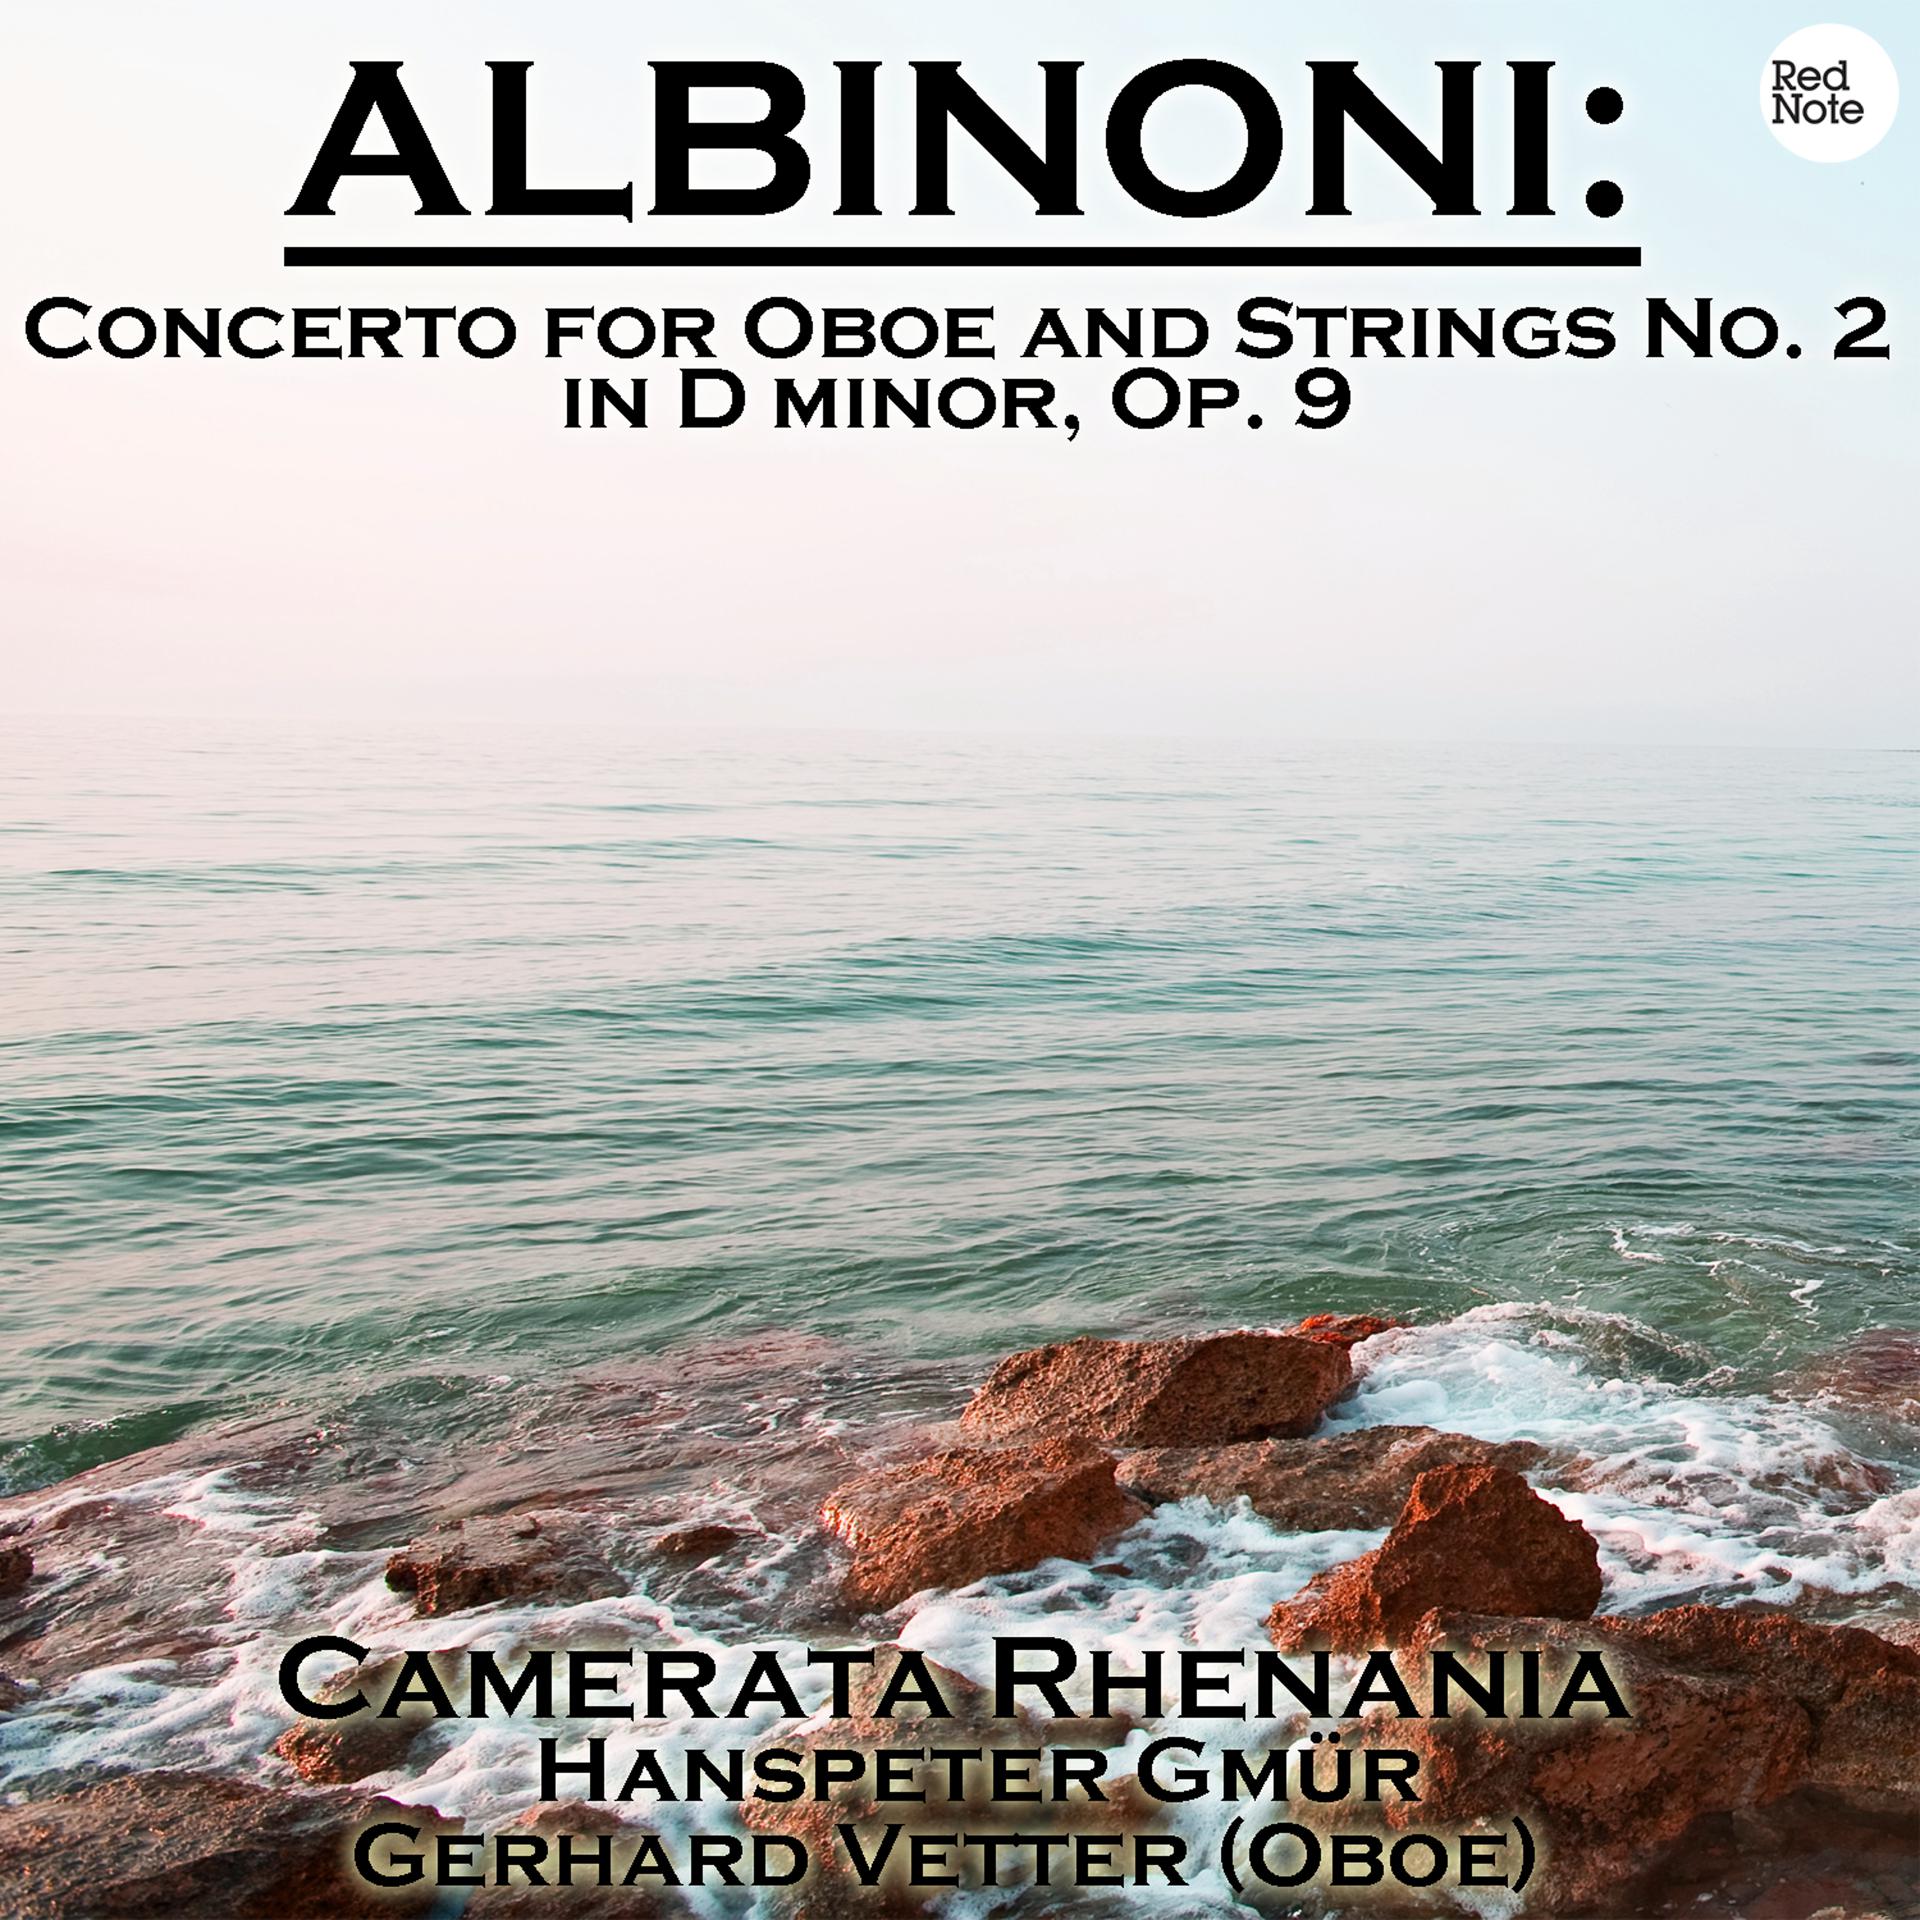 Постер альбома Albinoni: Concerto for Oboe and Strings No. 2 in D minor, Op. 9